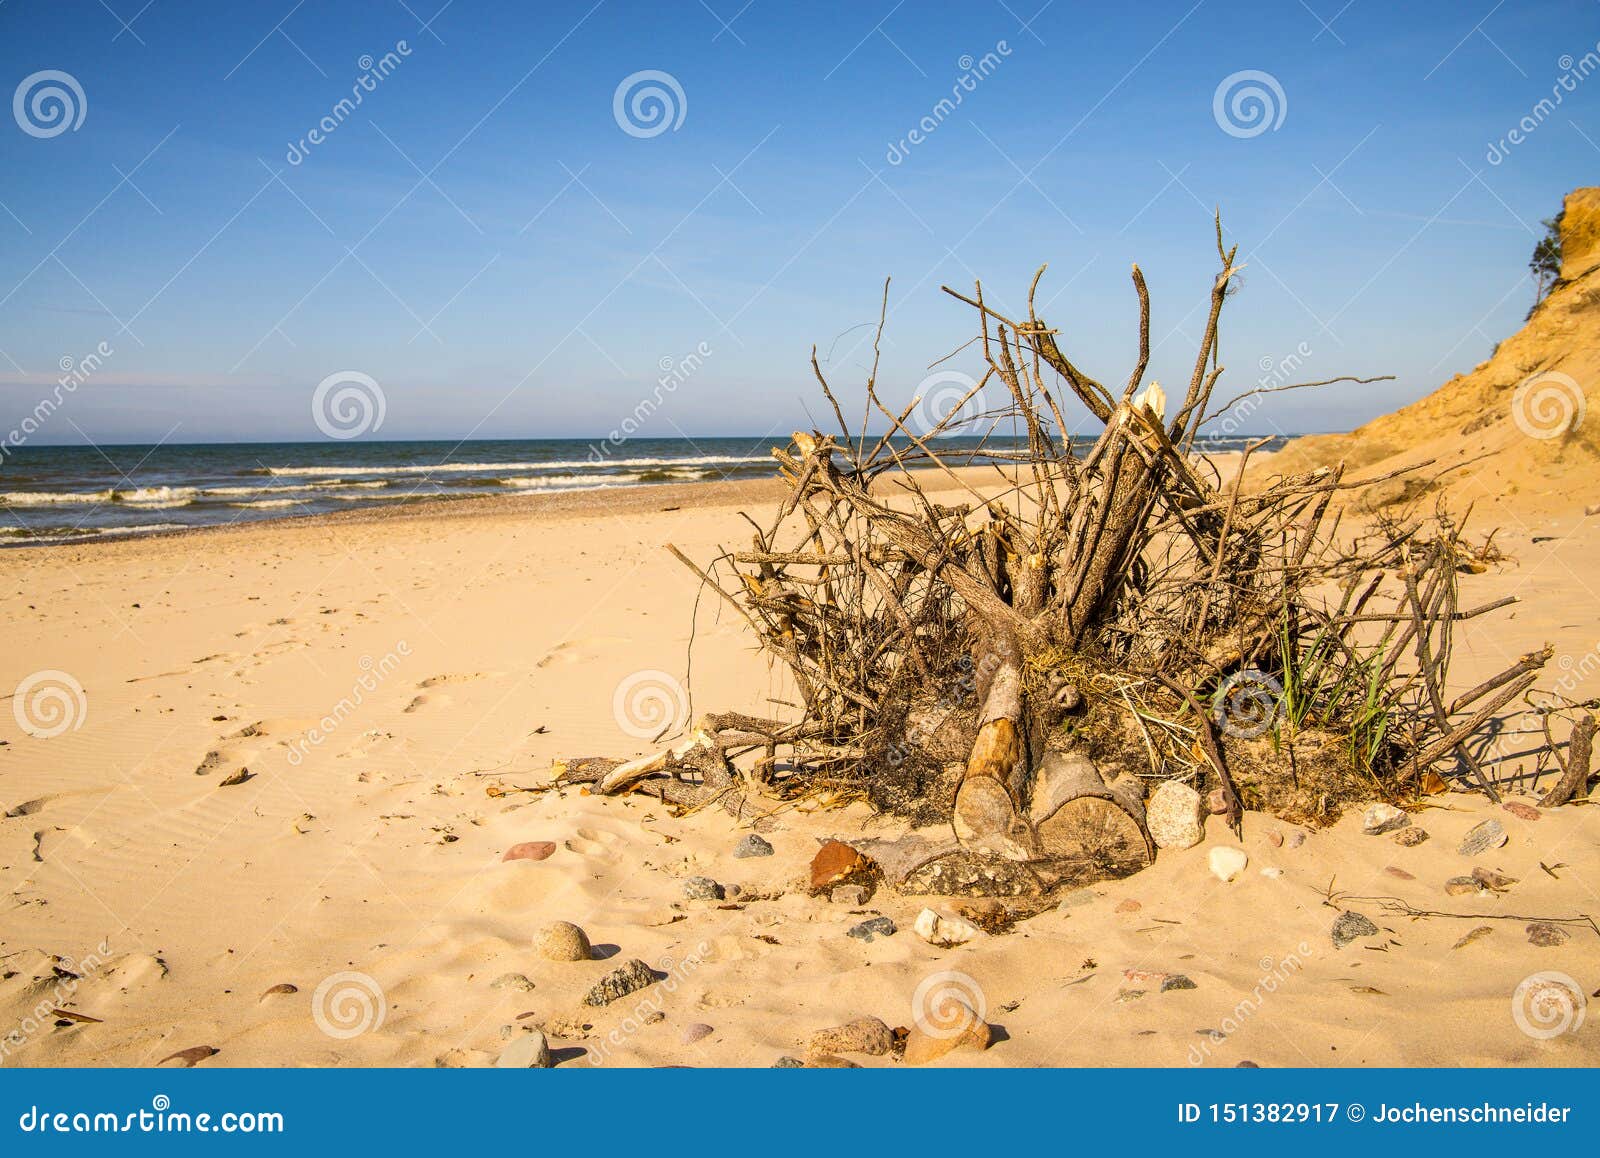 lonesome, unaffected beach of the baltic sea